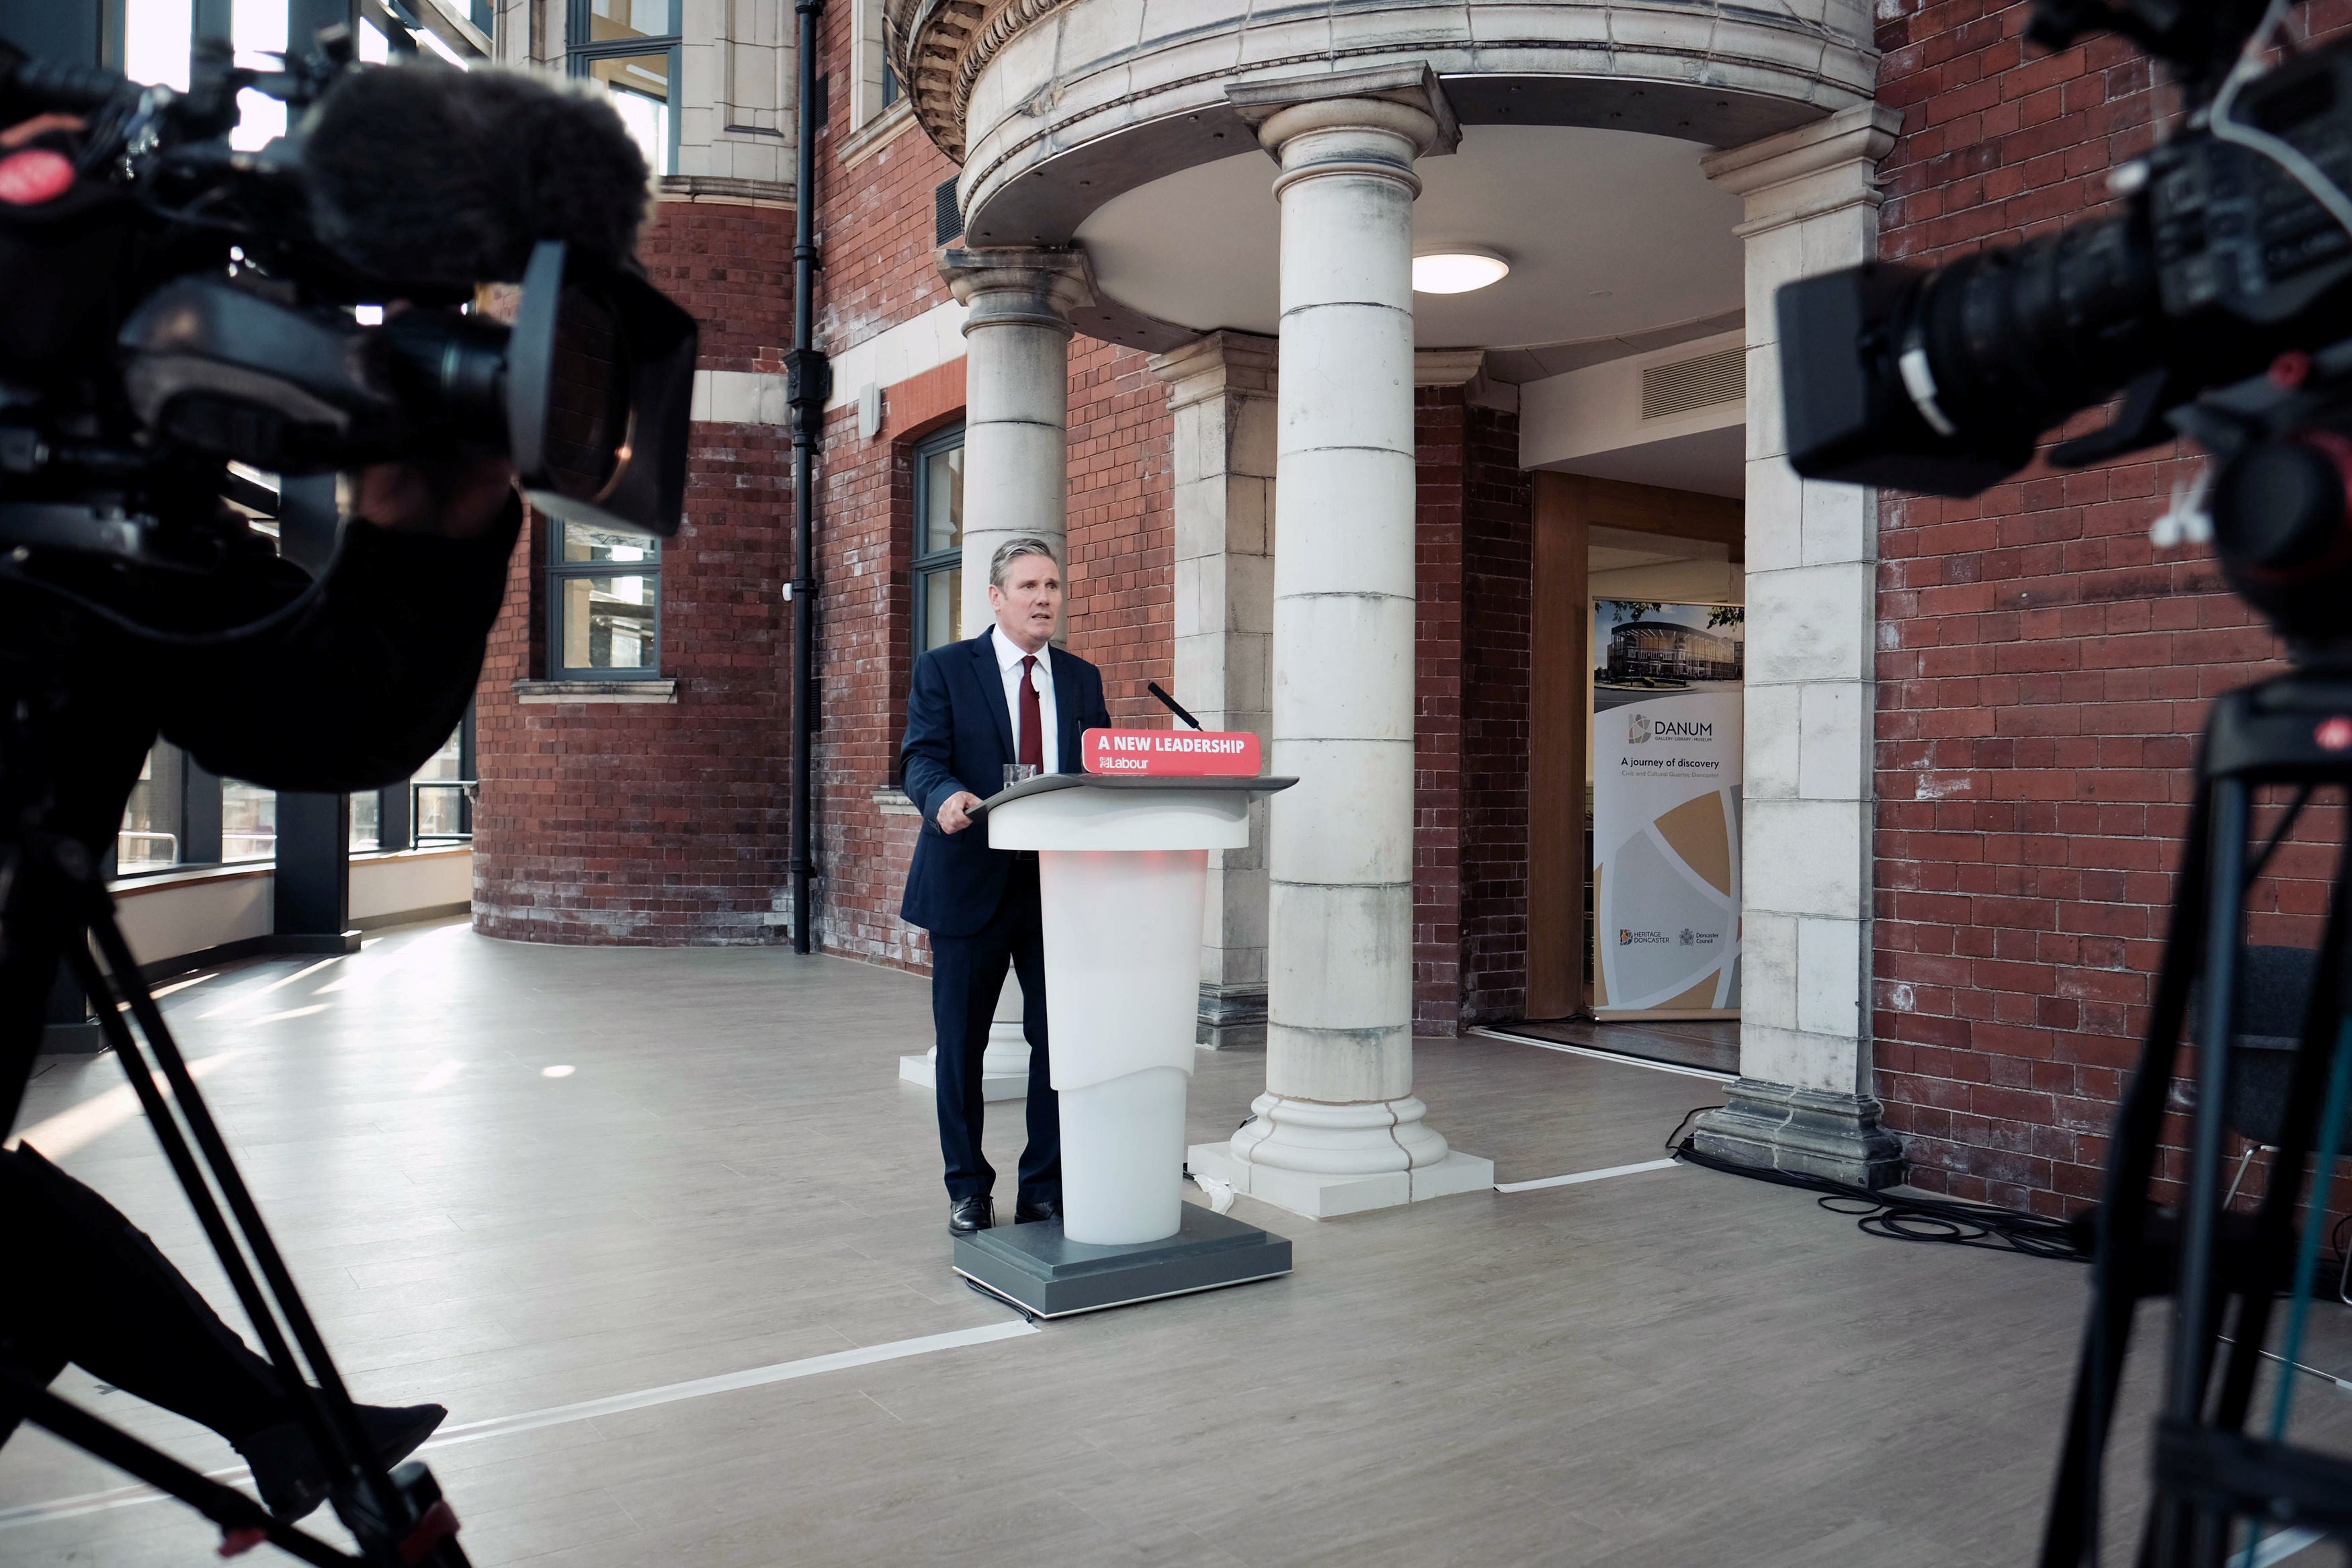 Keir Starmer claims Labour is the patriotic party in his online speech in Doncaster on Tuesday